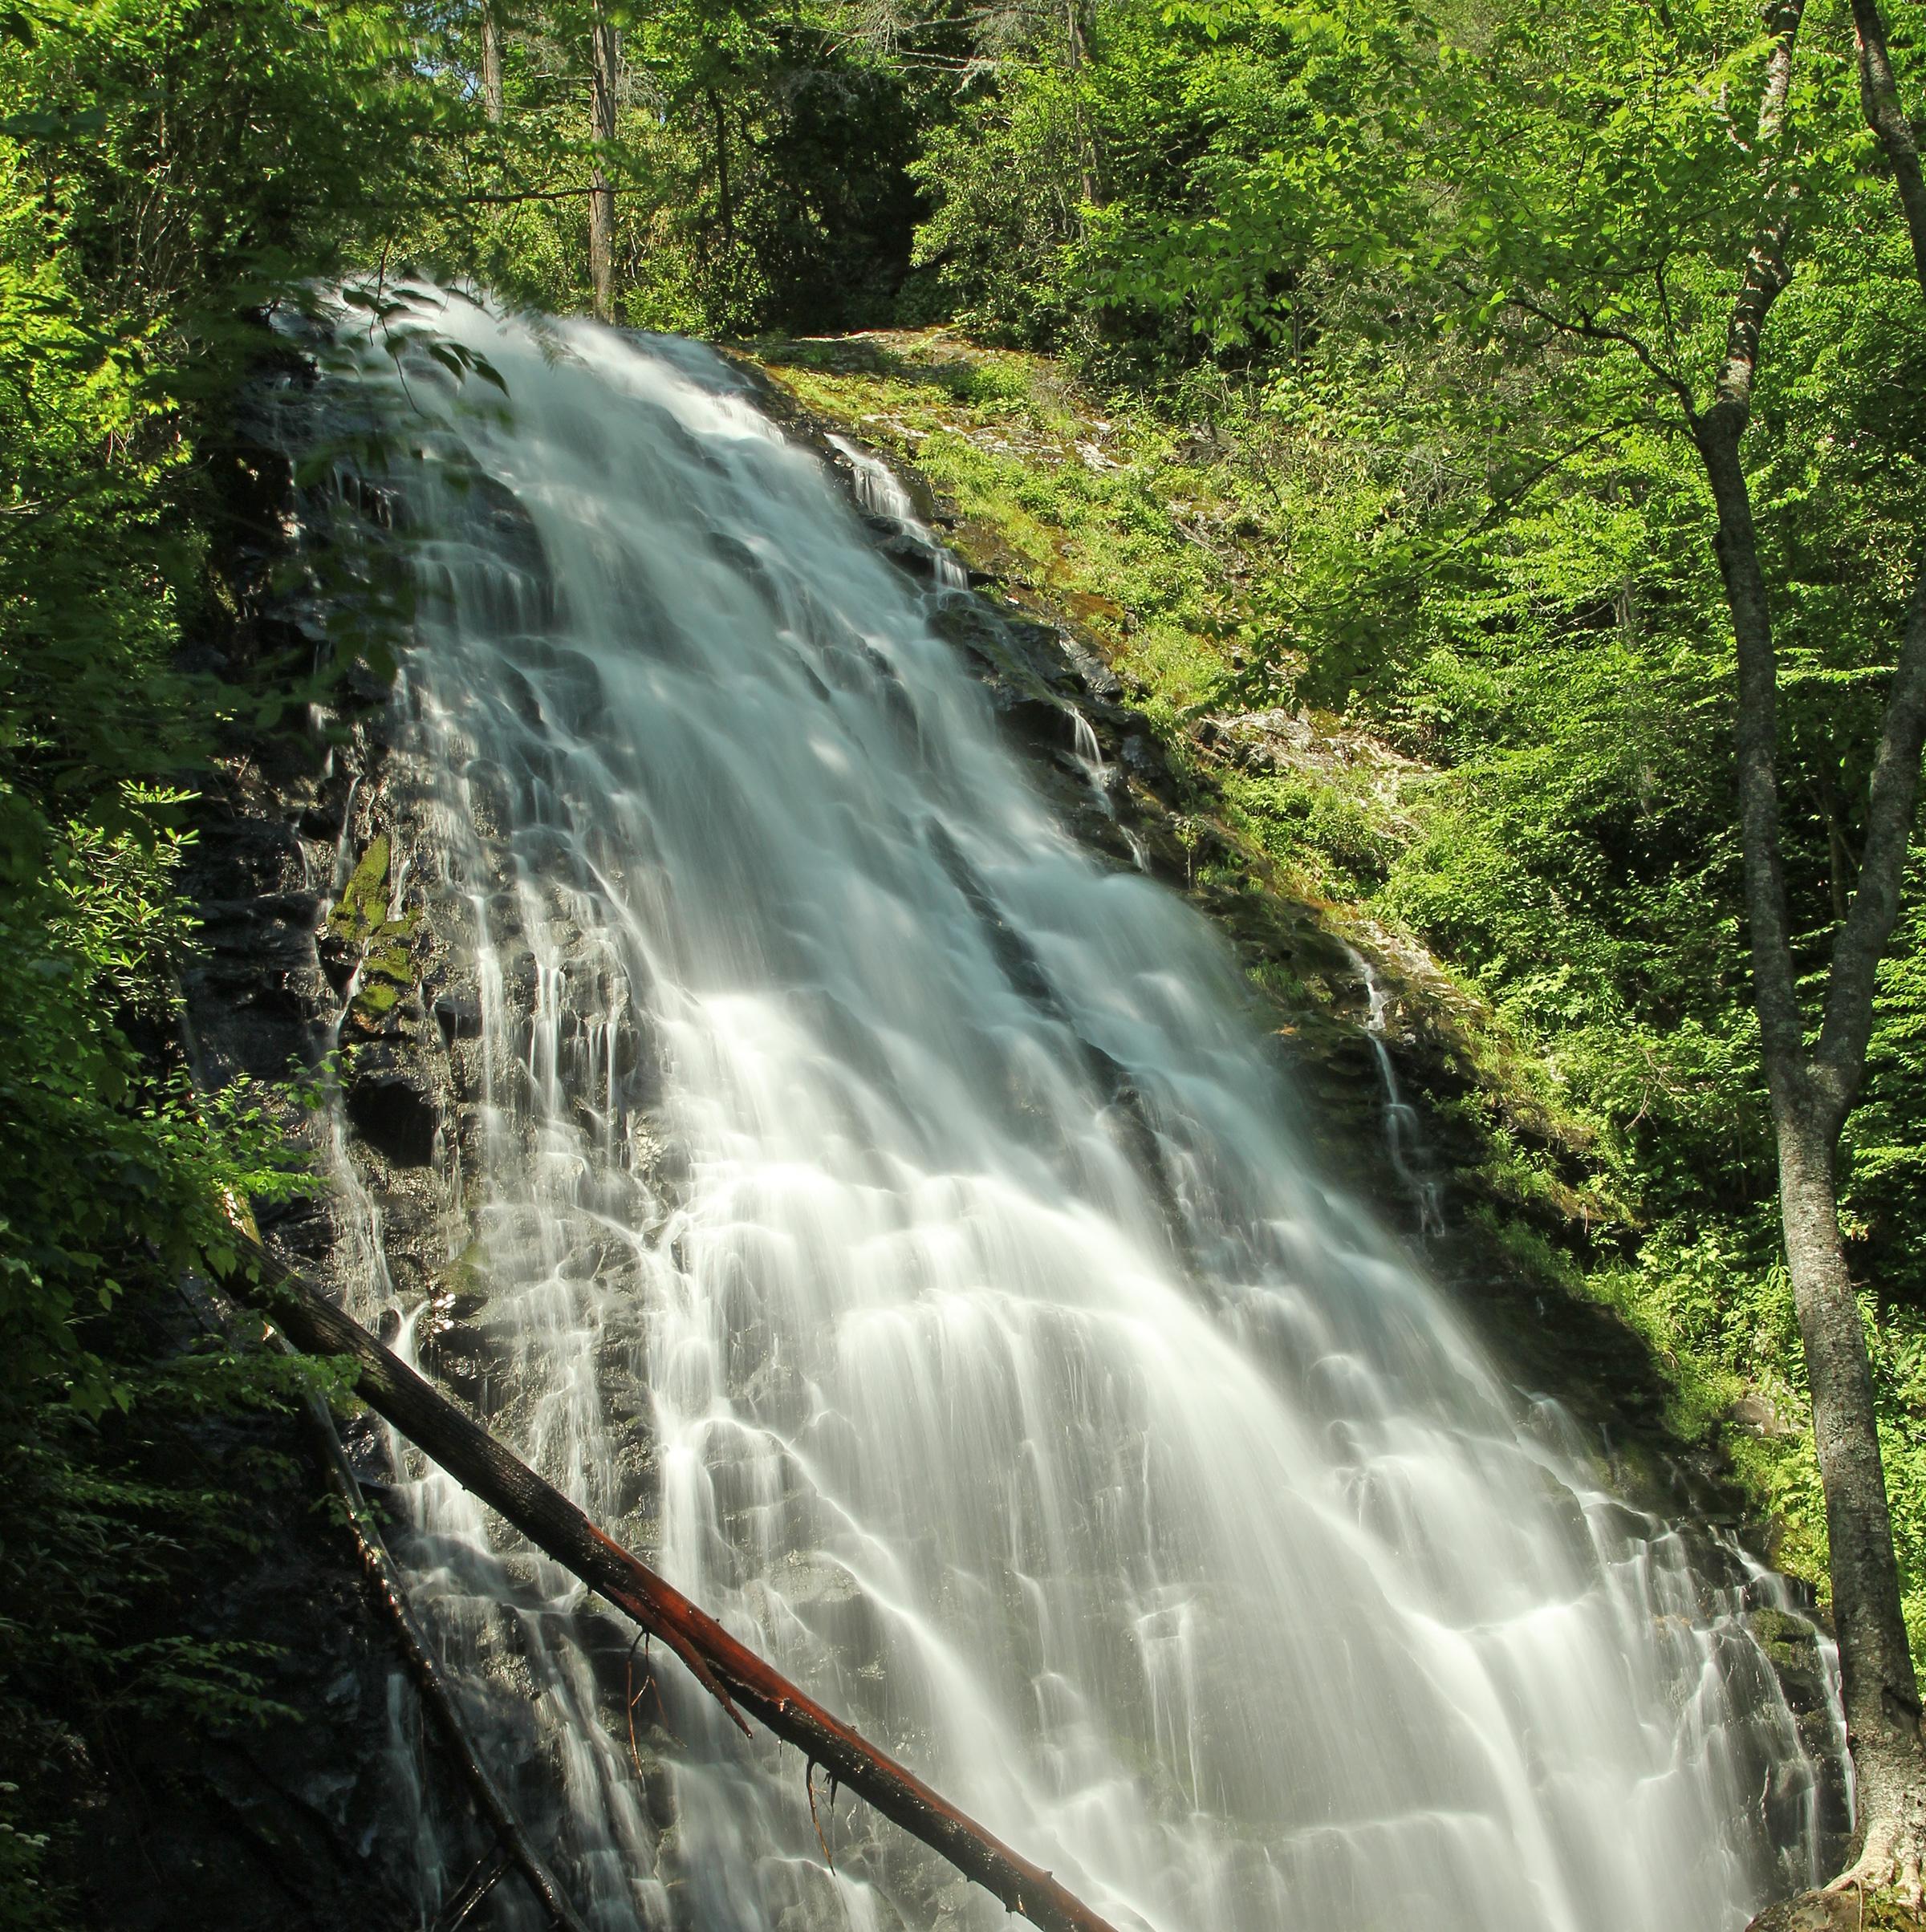 A waterfall surrounded by green, forest vegetation